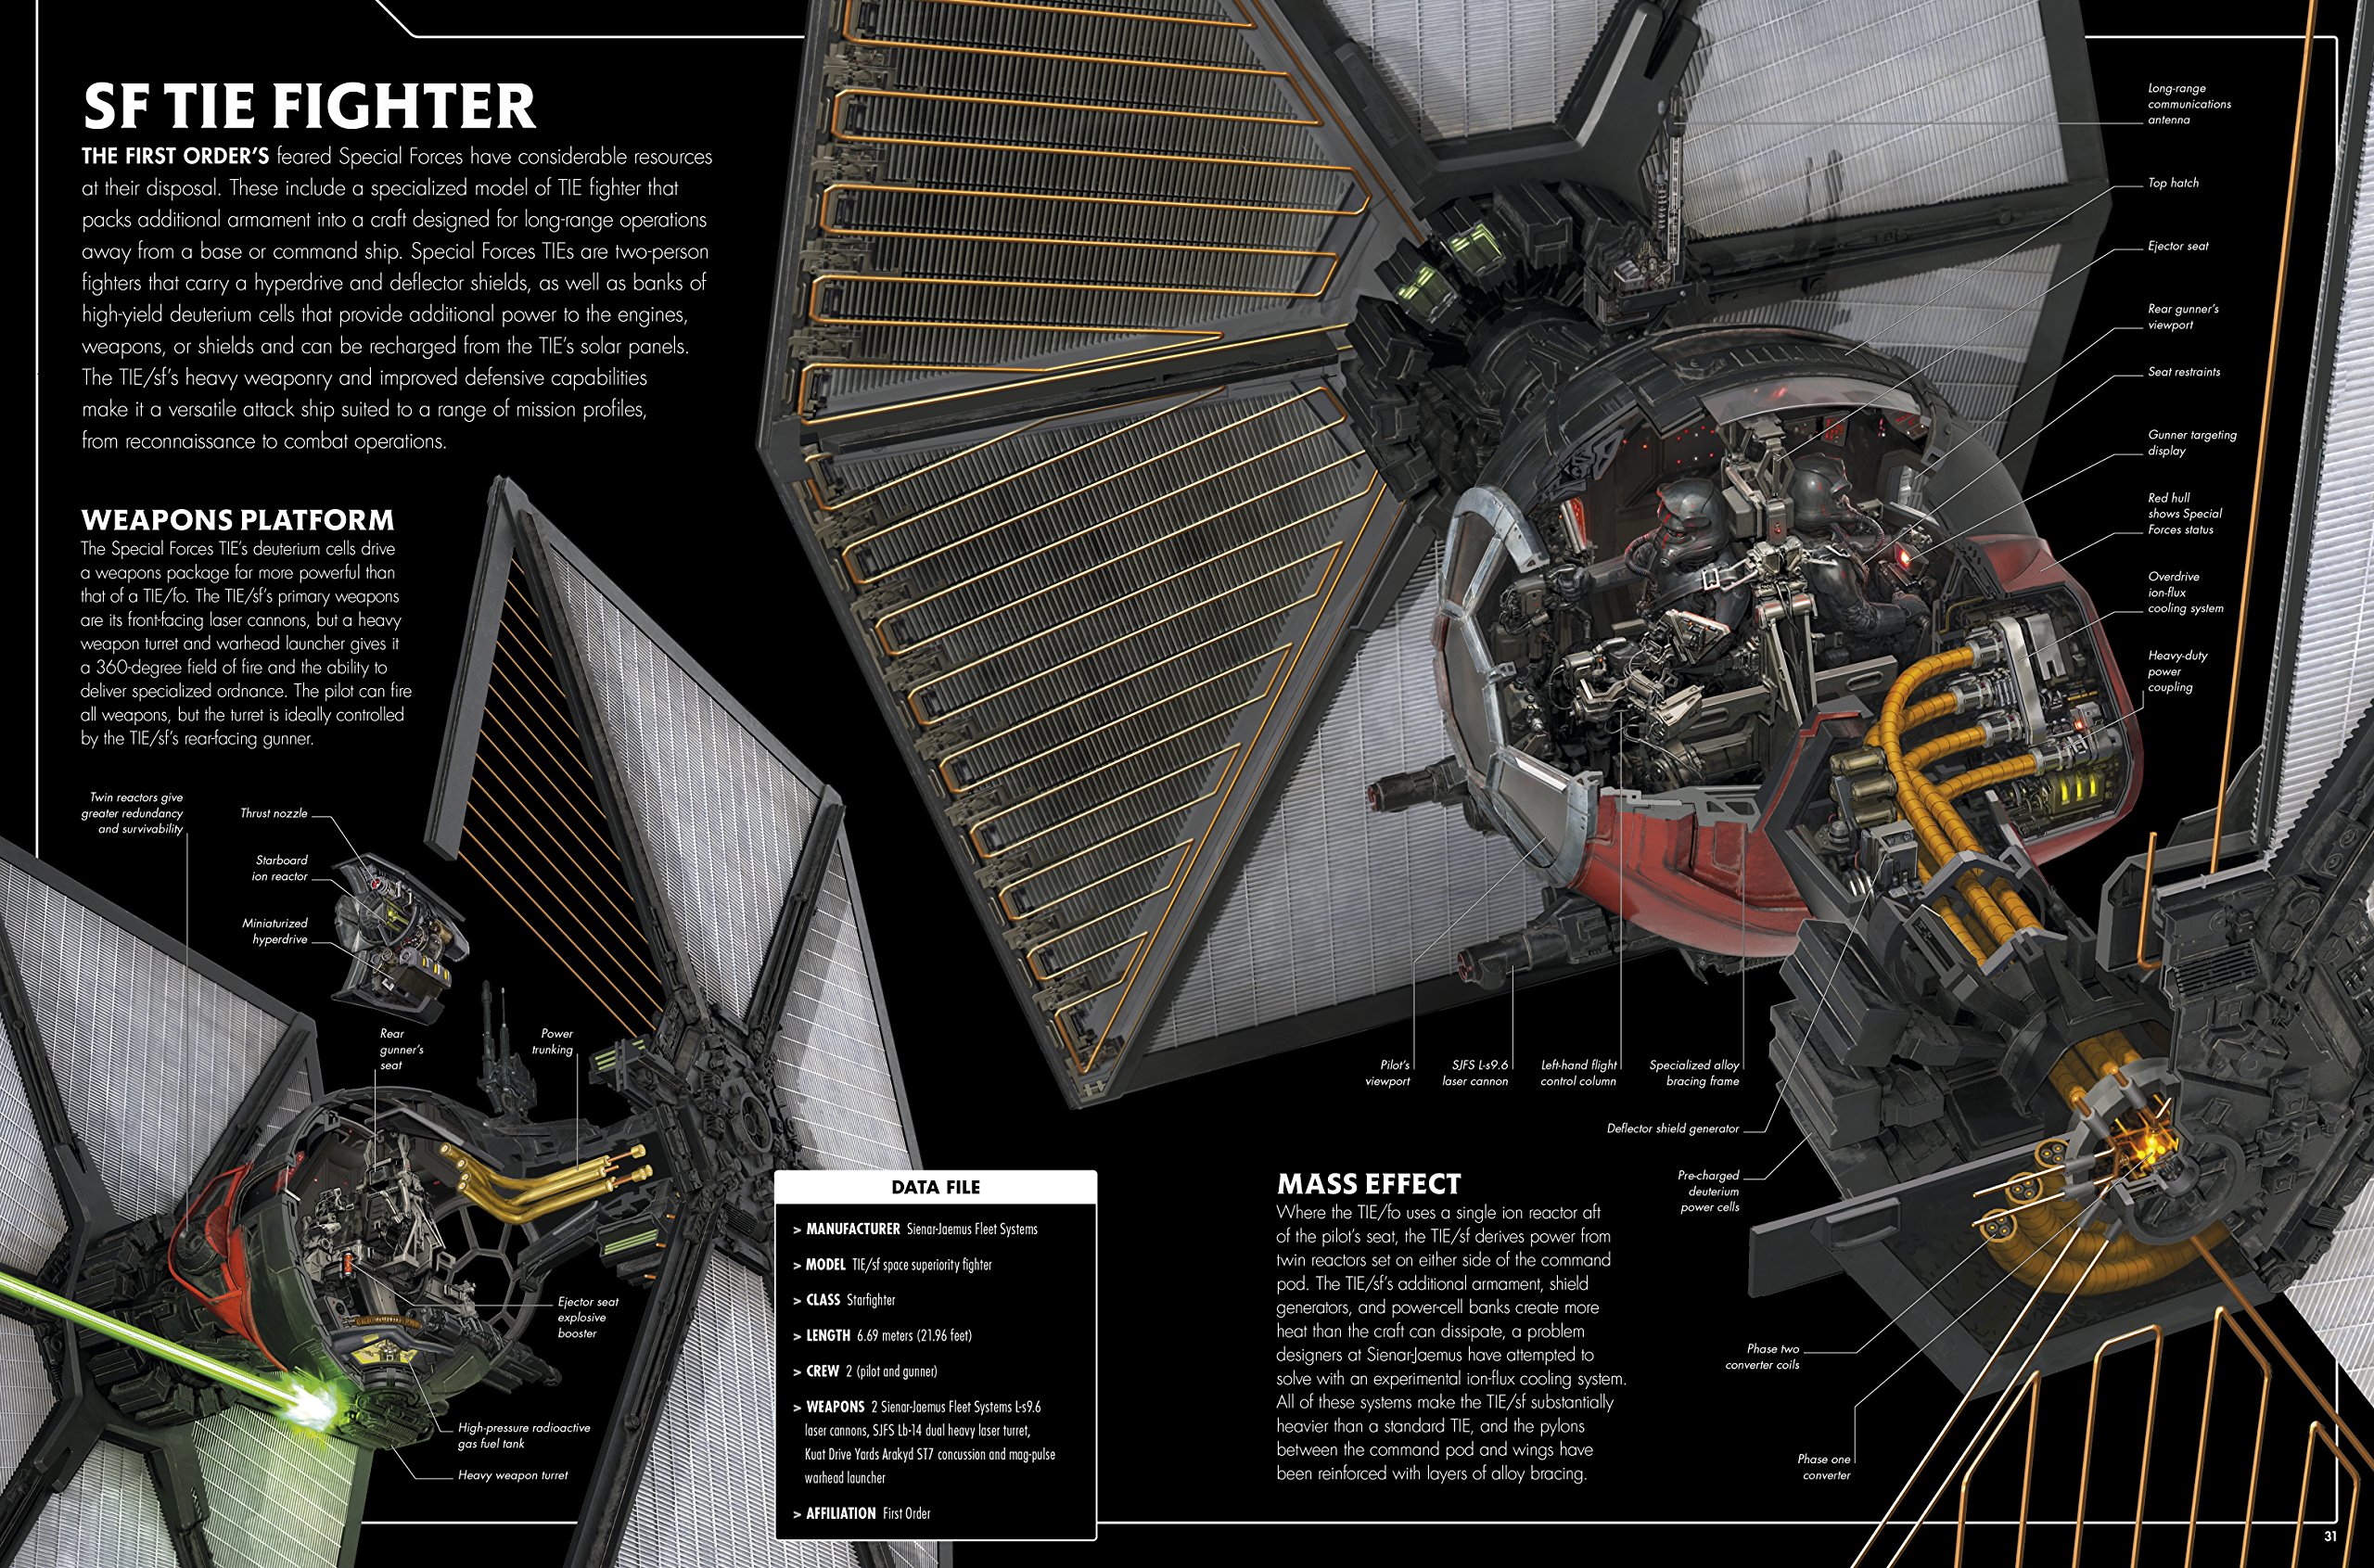 Star Wars: The Force Awakens Vehicle Cross Sections